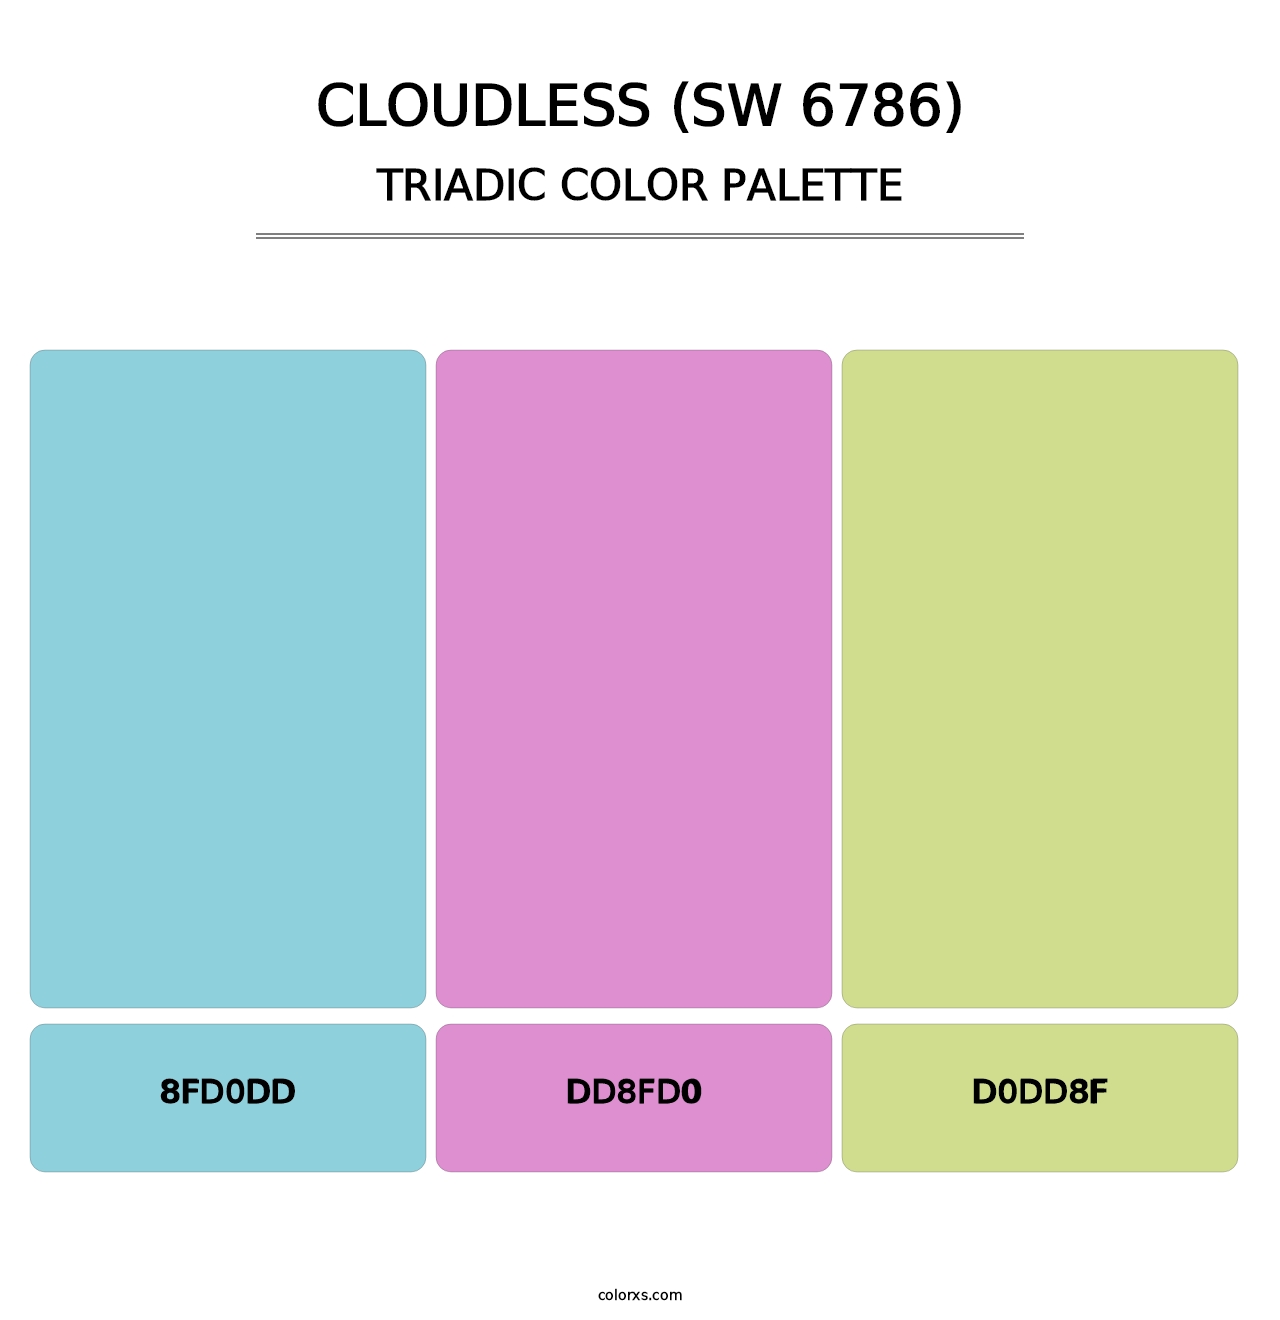 Cloudless (SW 6786) - Triadic Color Palette